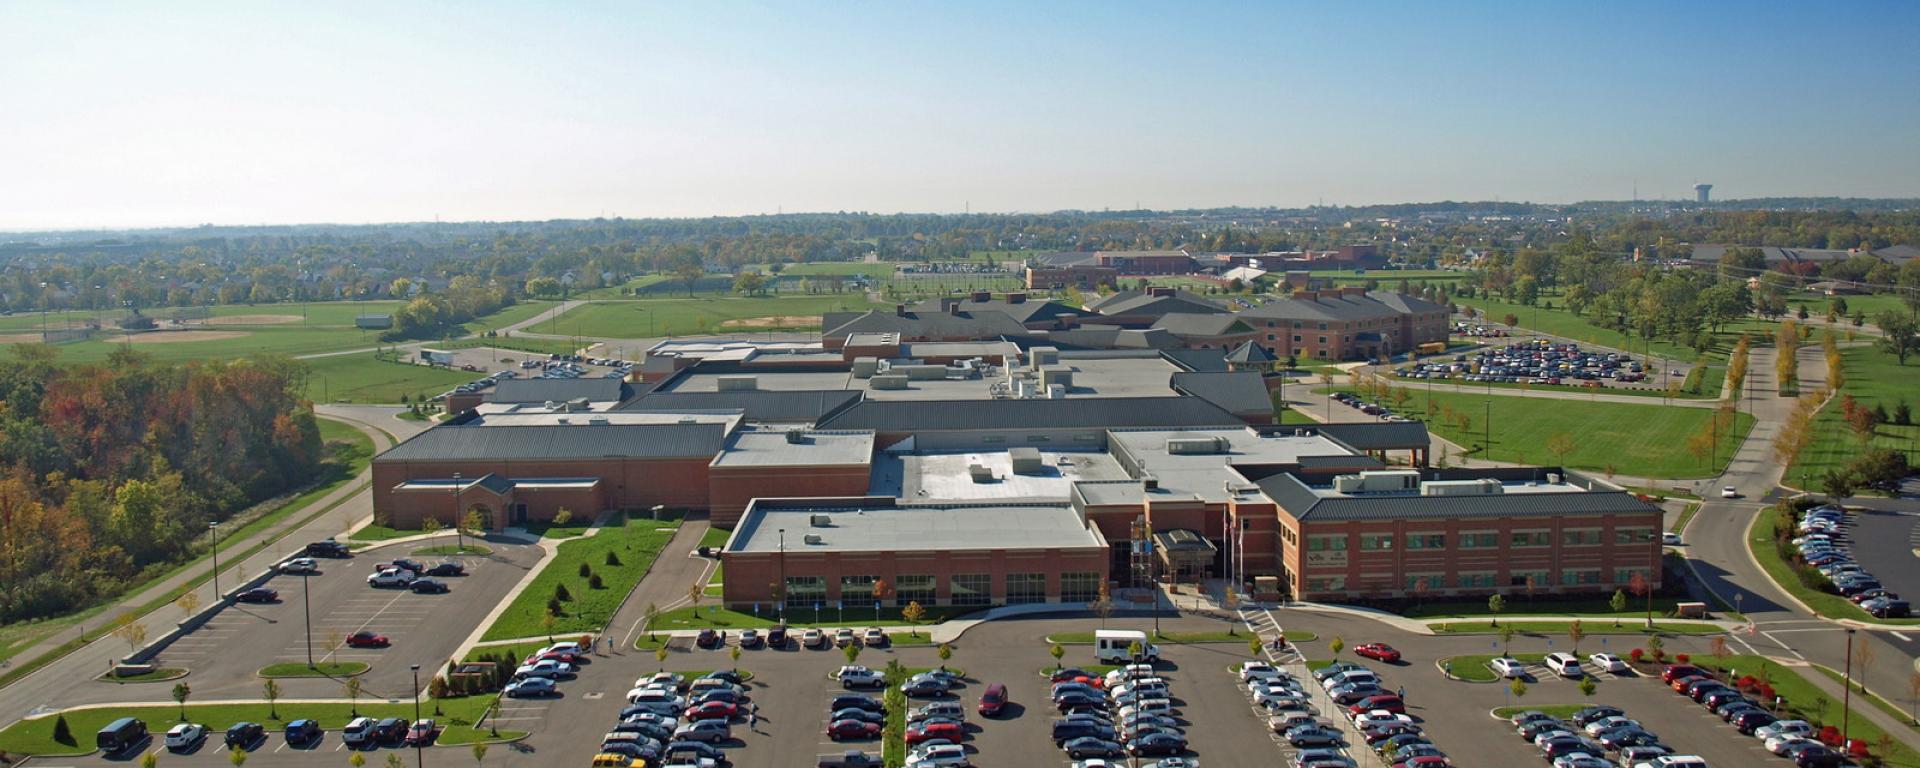 aerial of parking lot and front of building